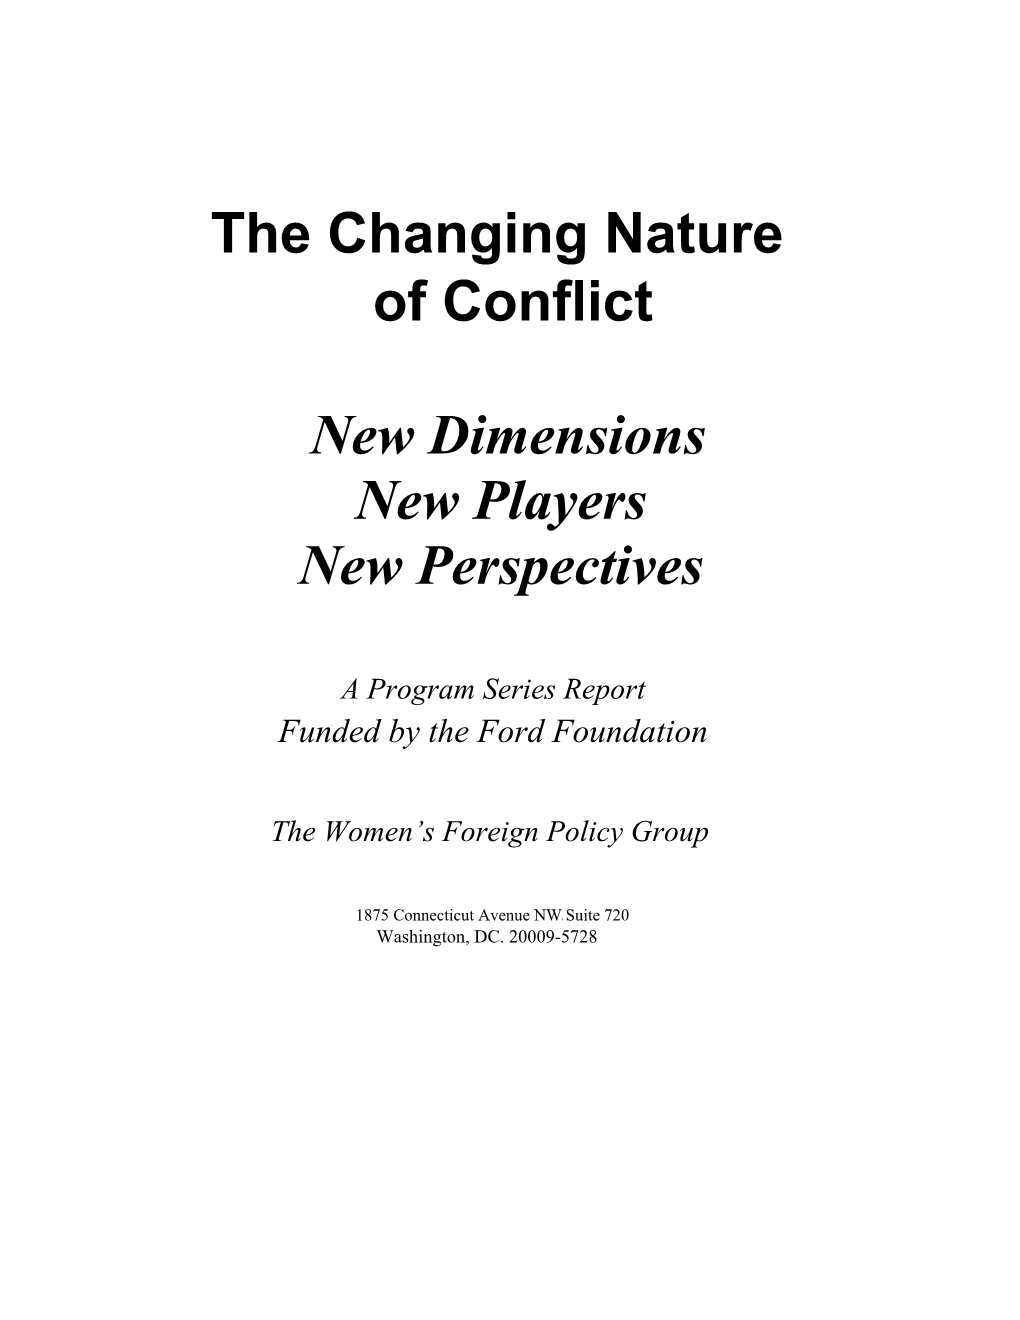 Changing Nature of Conflict